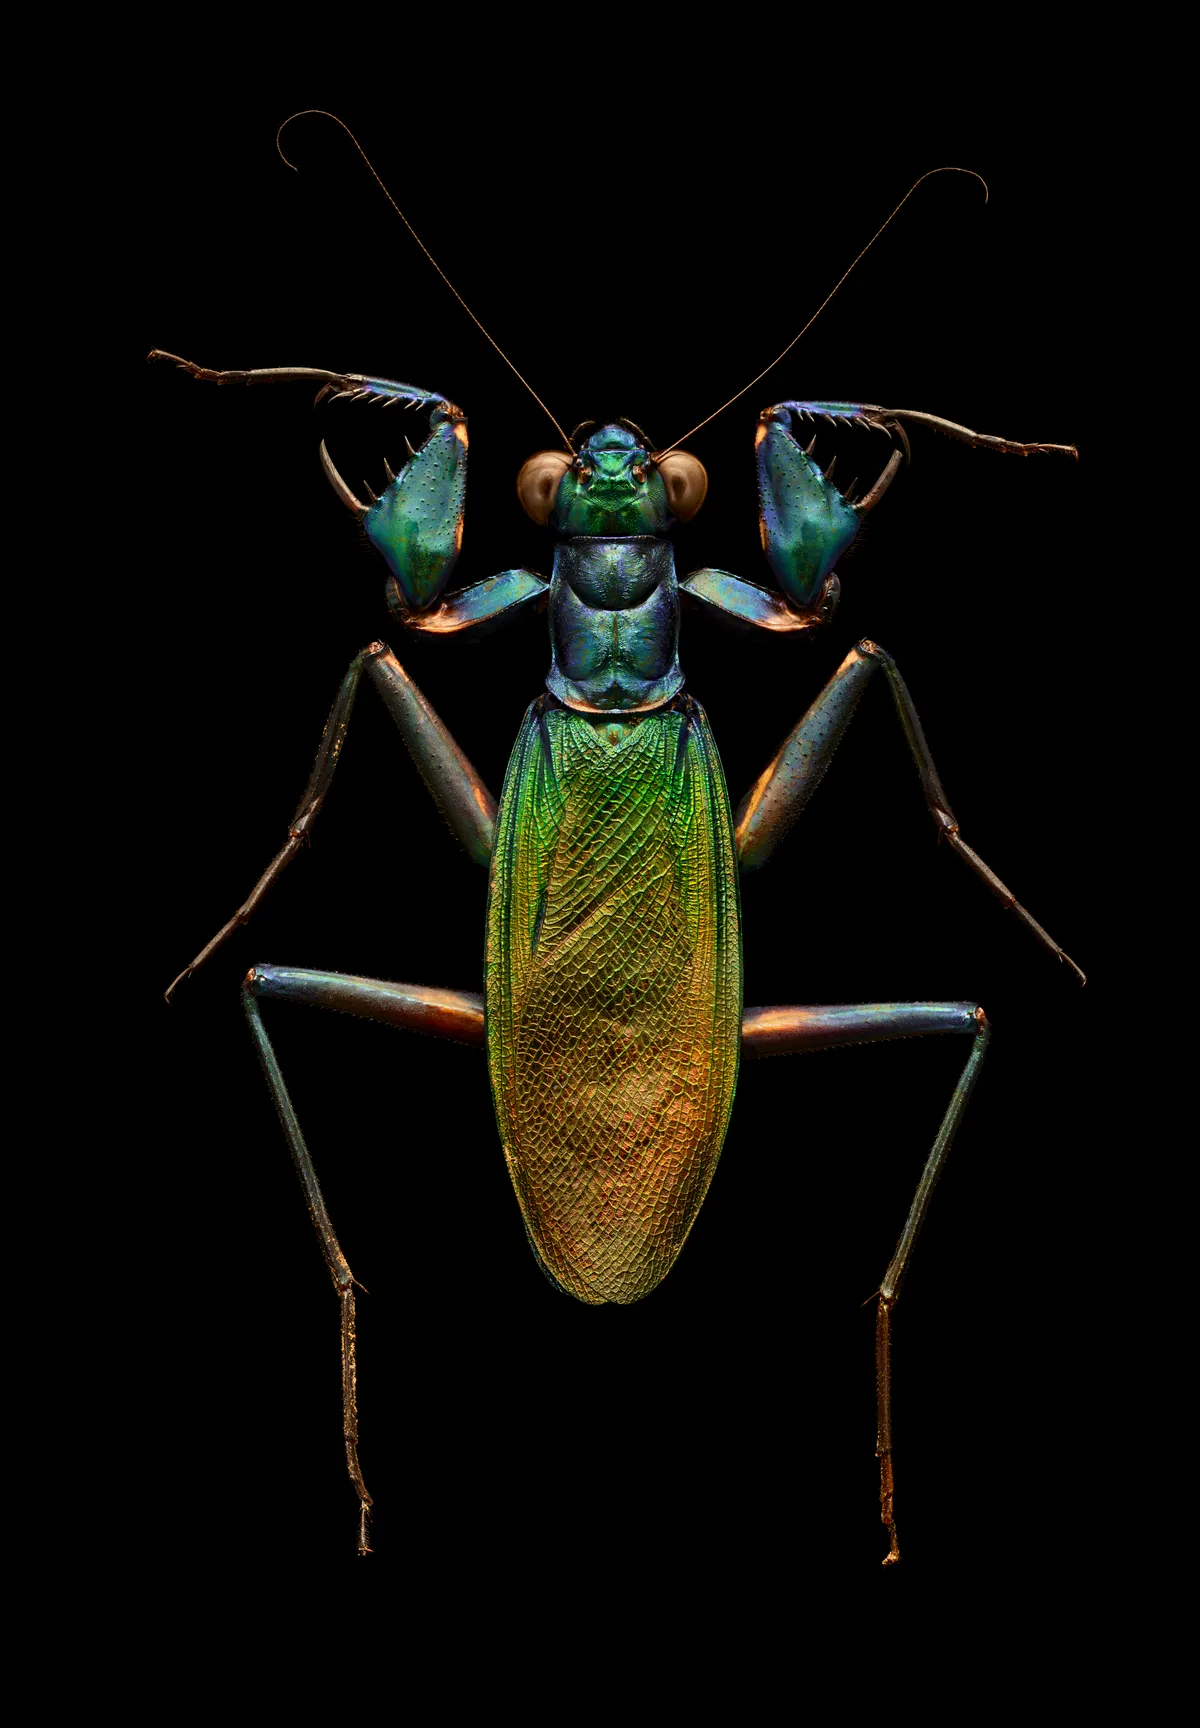 Iridescent bark mantis. The spectacular metallic colours of this species are very unusual for a mantis; also atypical is the wide front femur armed with a large, dagger-like spine. © Levon Biss